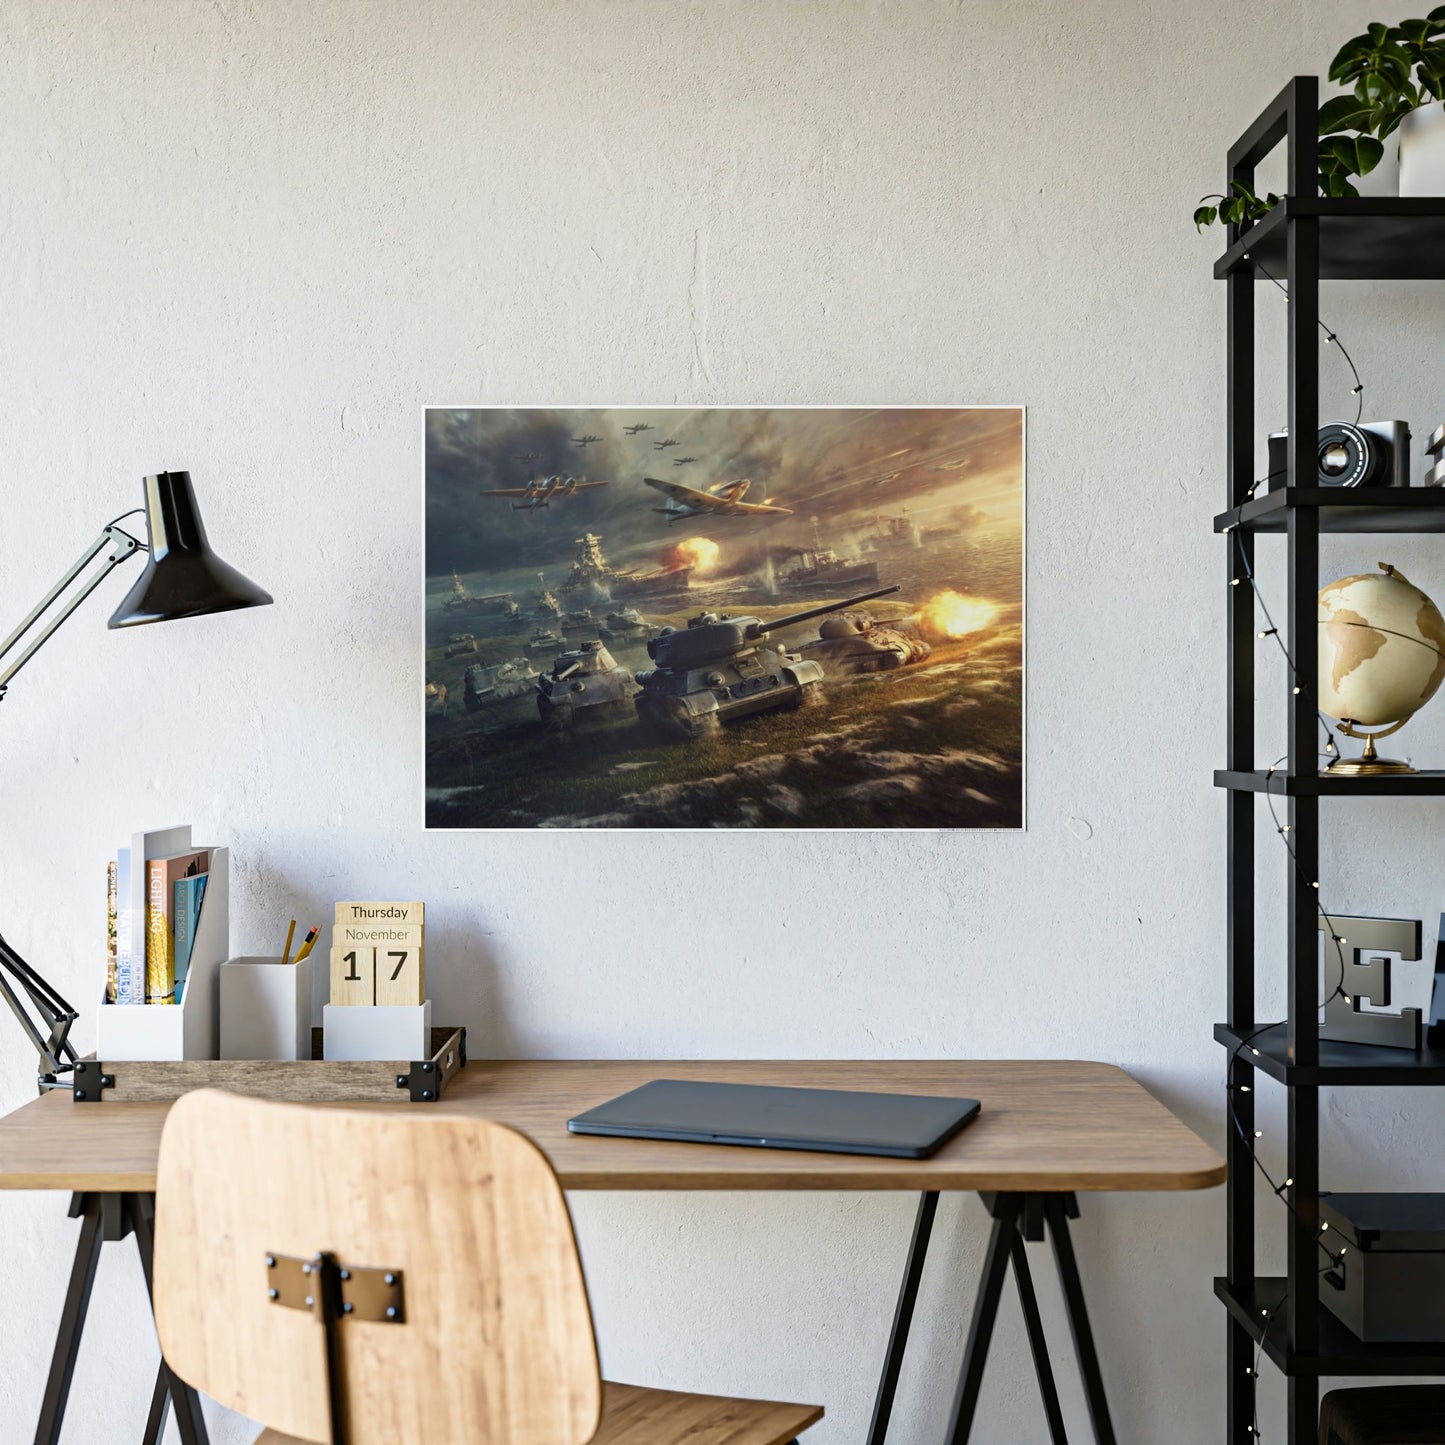 Tankers' Chronicles: Captivating World of Tanks Canvas & Poster Wall Art